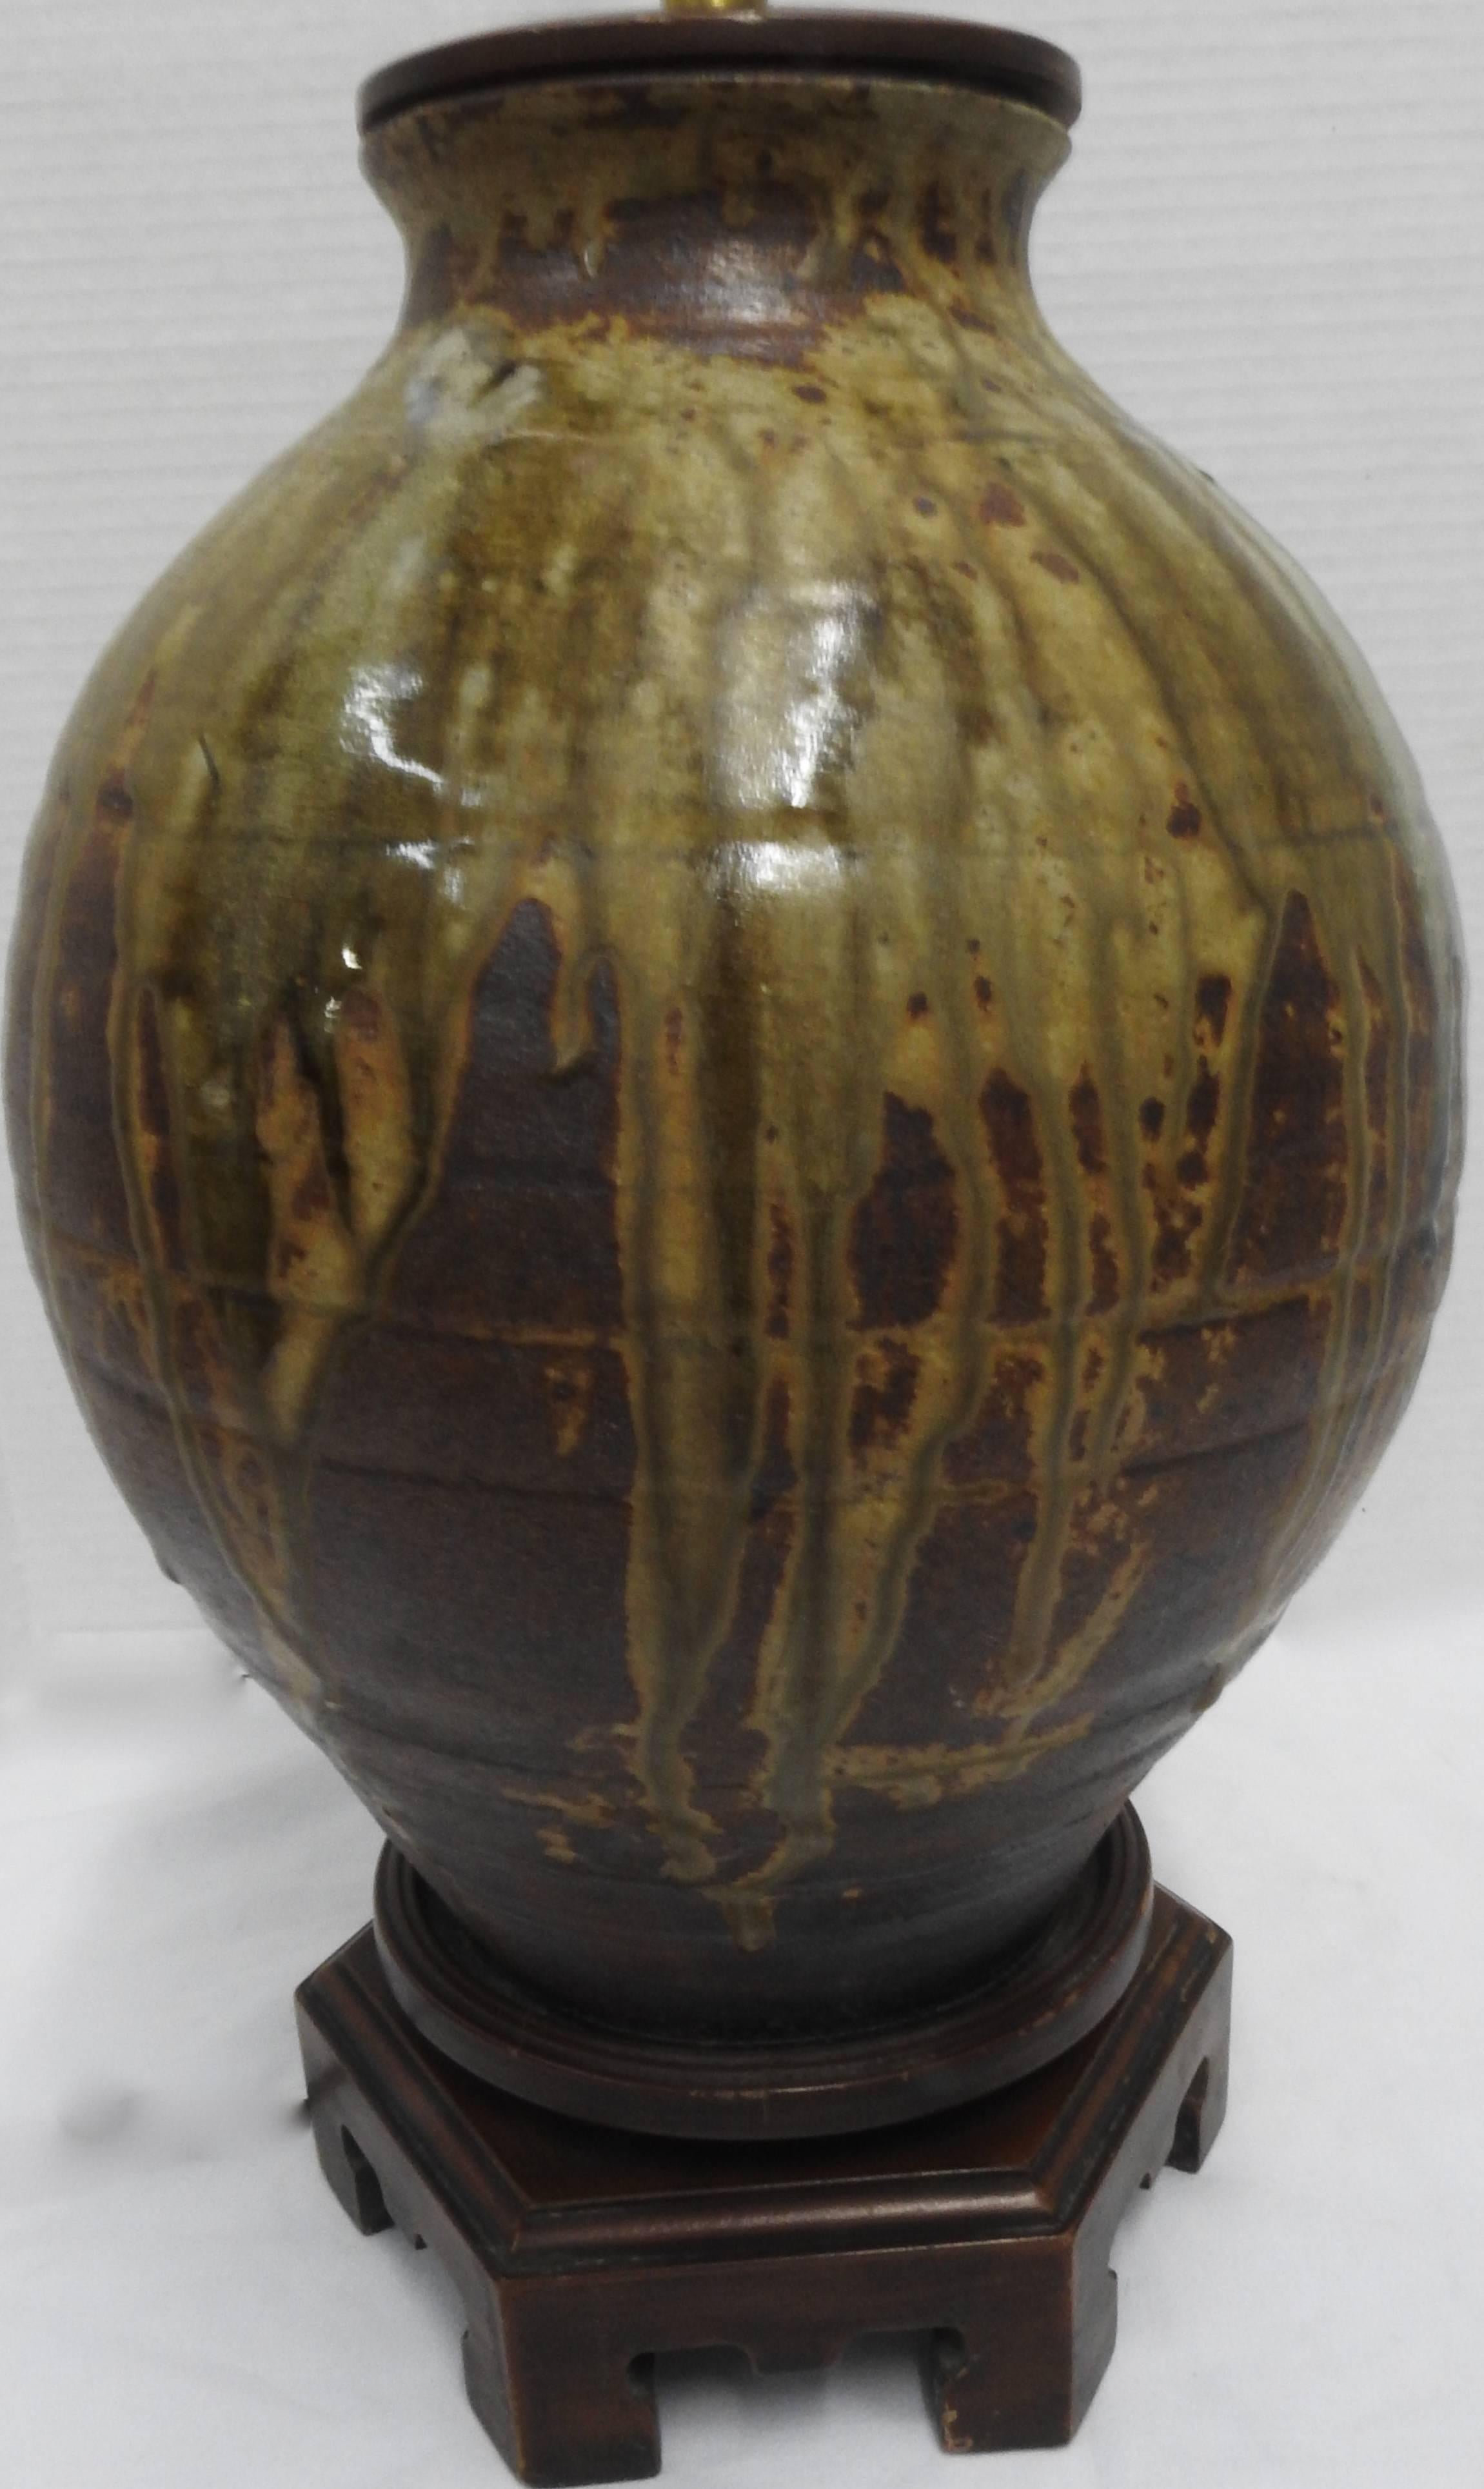 This is a stunning Norman Perry, Inc. lamp with a rich art pottery body with wood cap and base, circa 1970. Streaks of green and gold enliven the richly textured brown pottery. The top column is made of brass. The body is 17